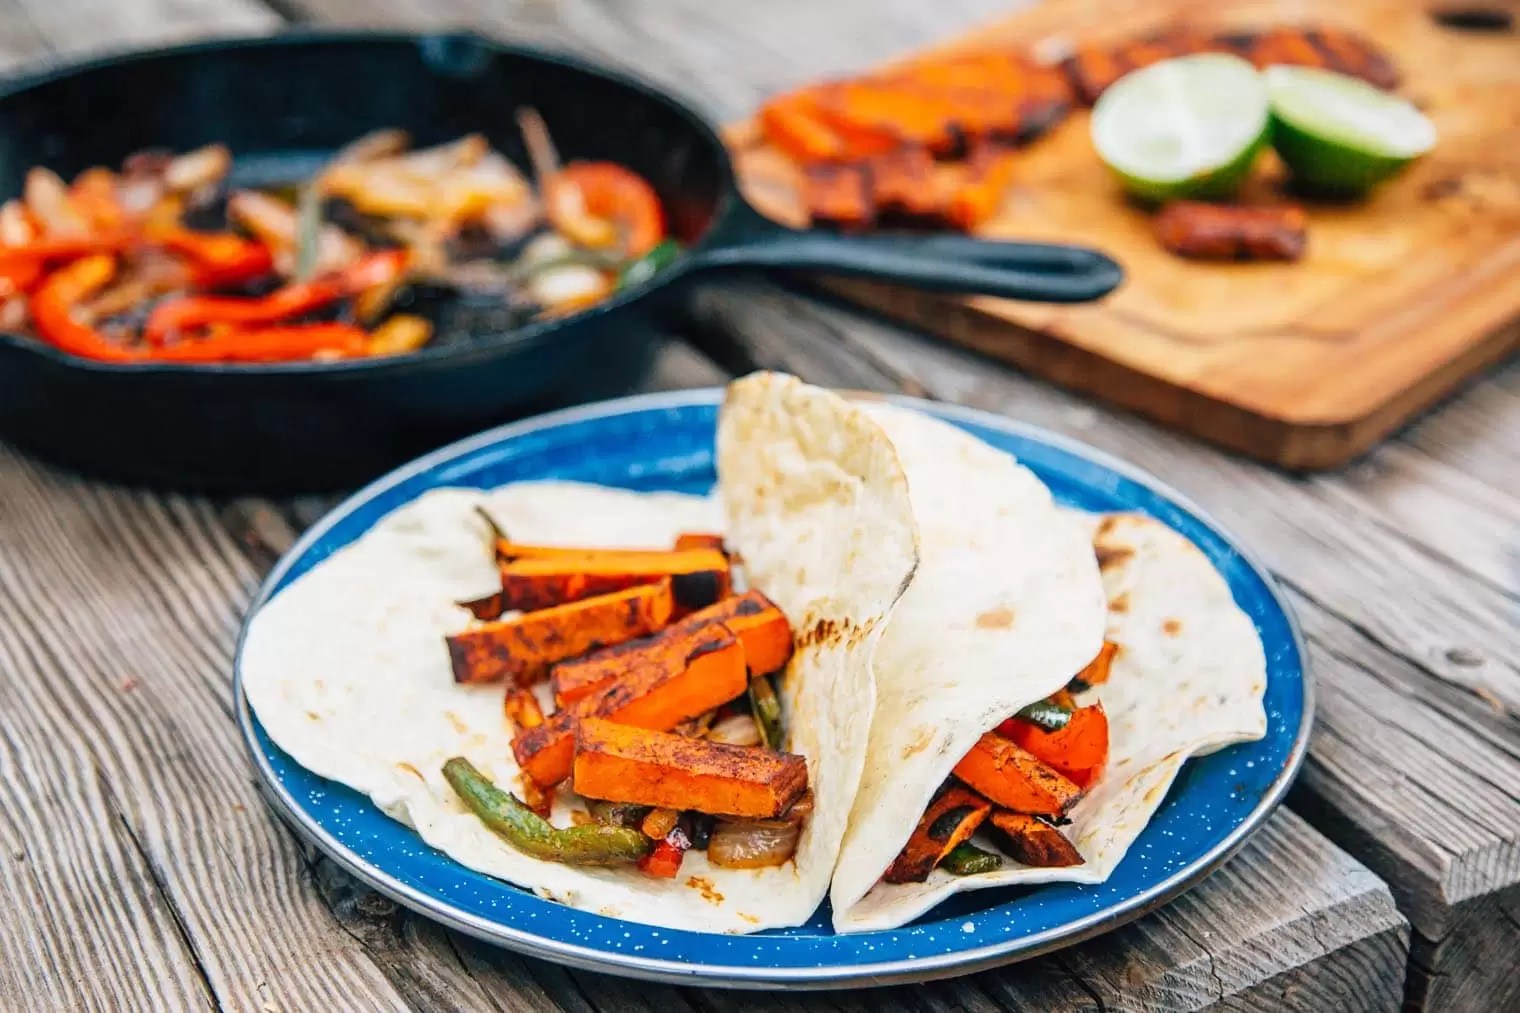 Fajitas filled with sweet potatoes, roasted peppers and onions on a blue plate